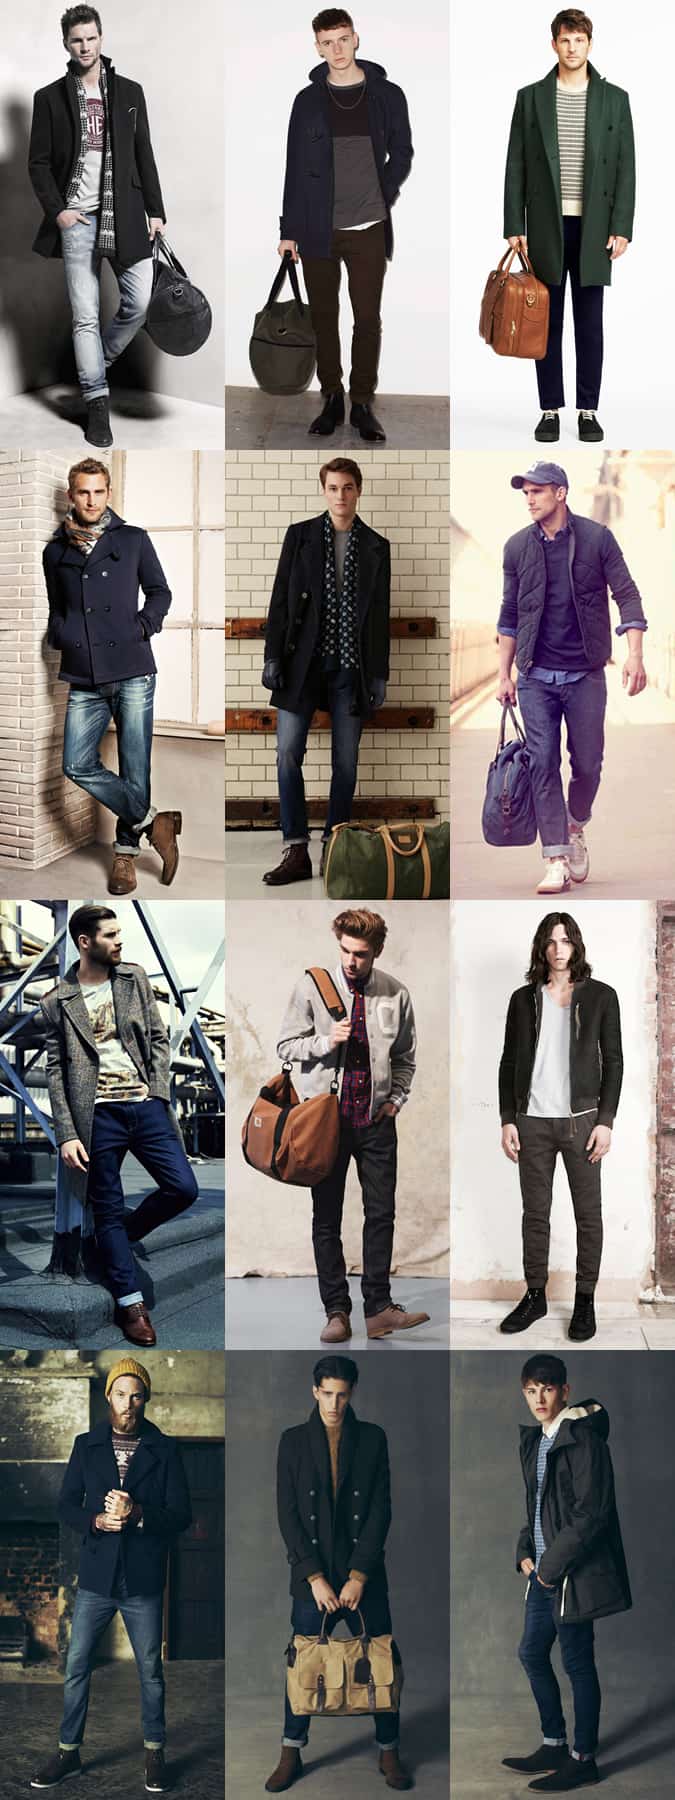 Men's Travel Lookbook Outfit Inspiration